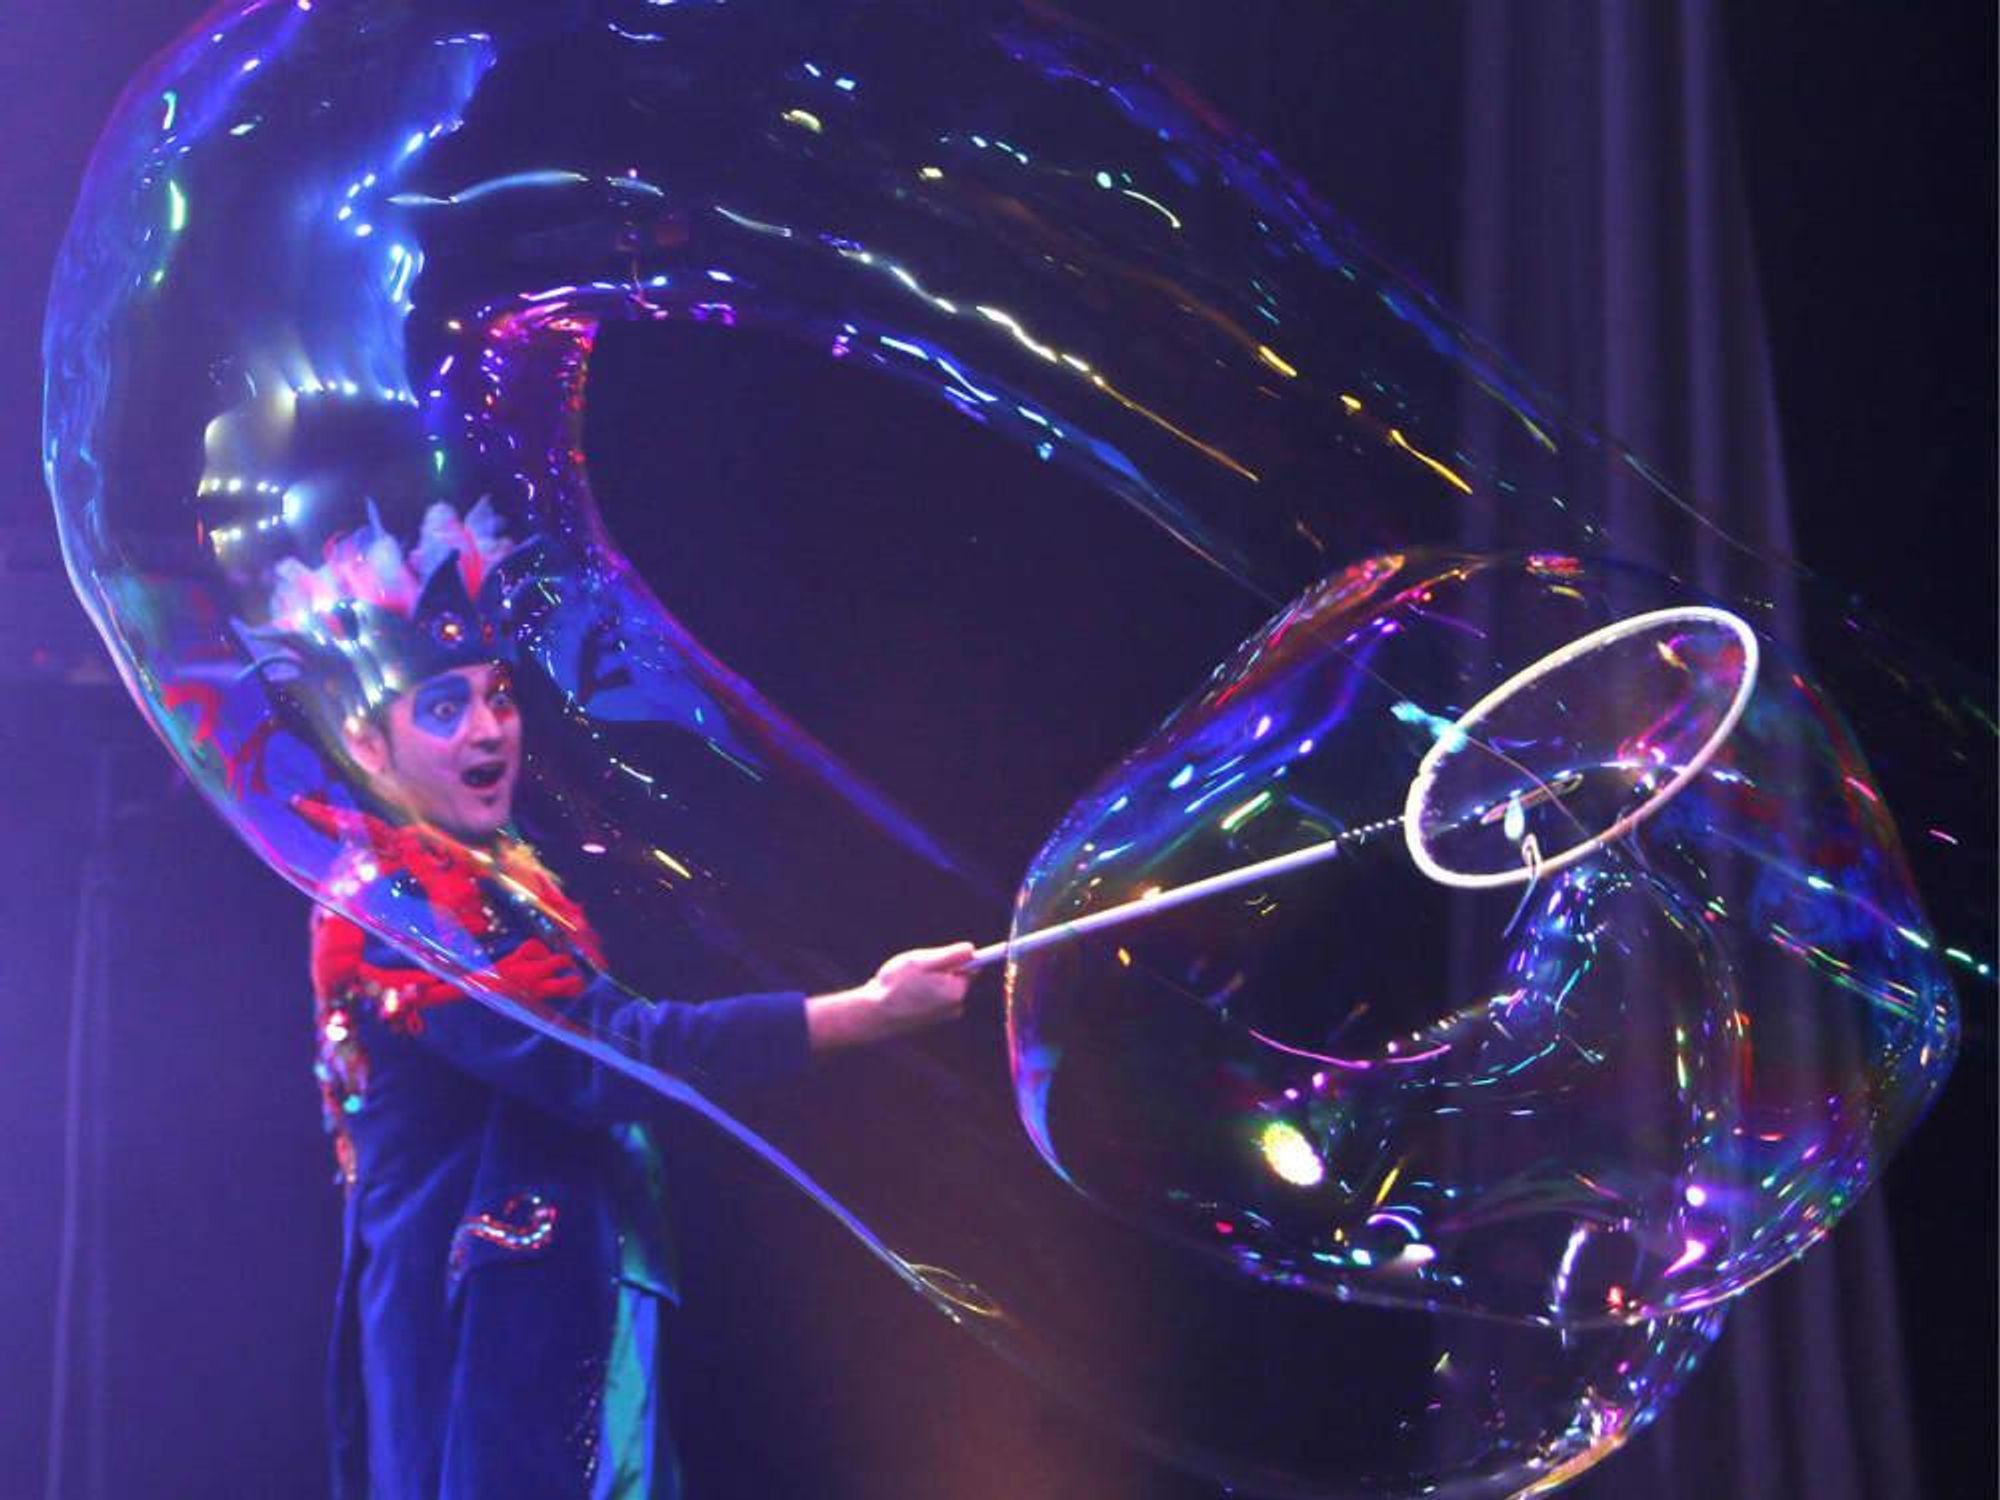 Society for the Performing Arts presents Underwater Bubble Show